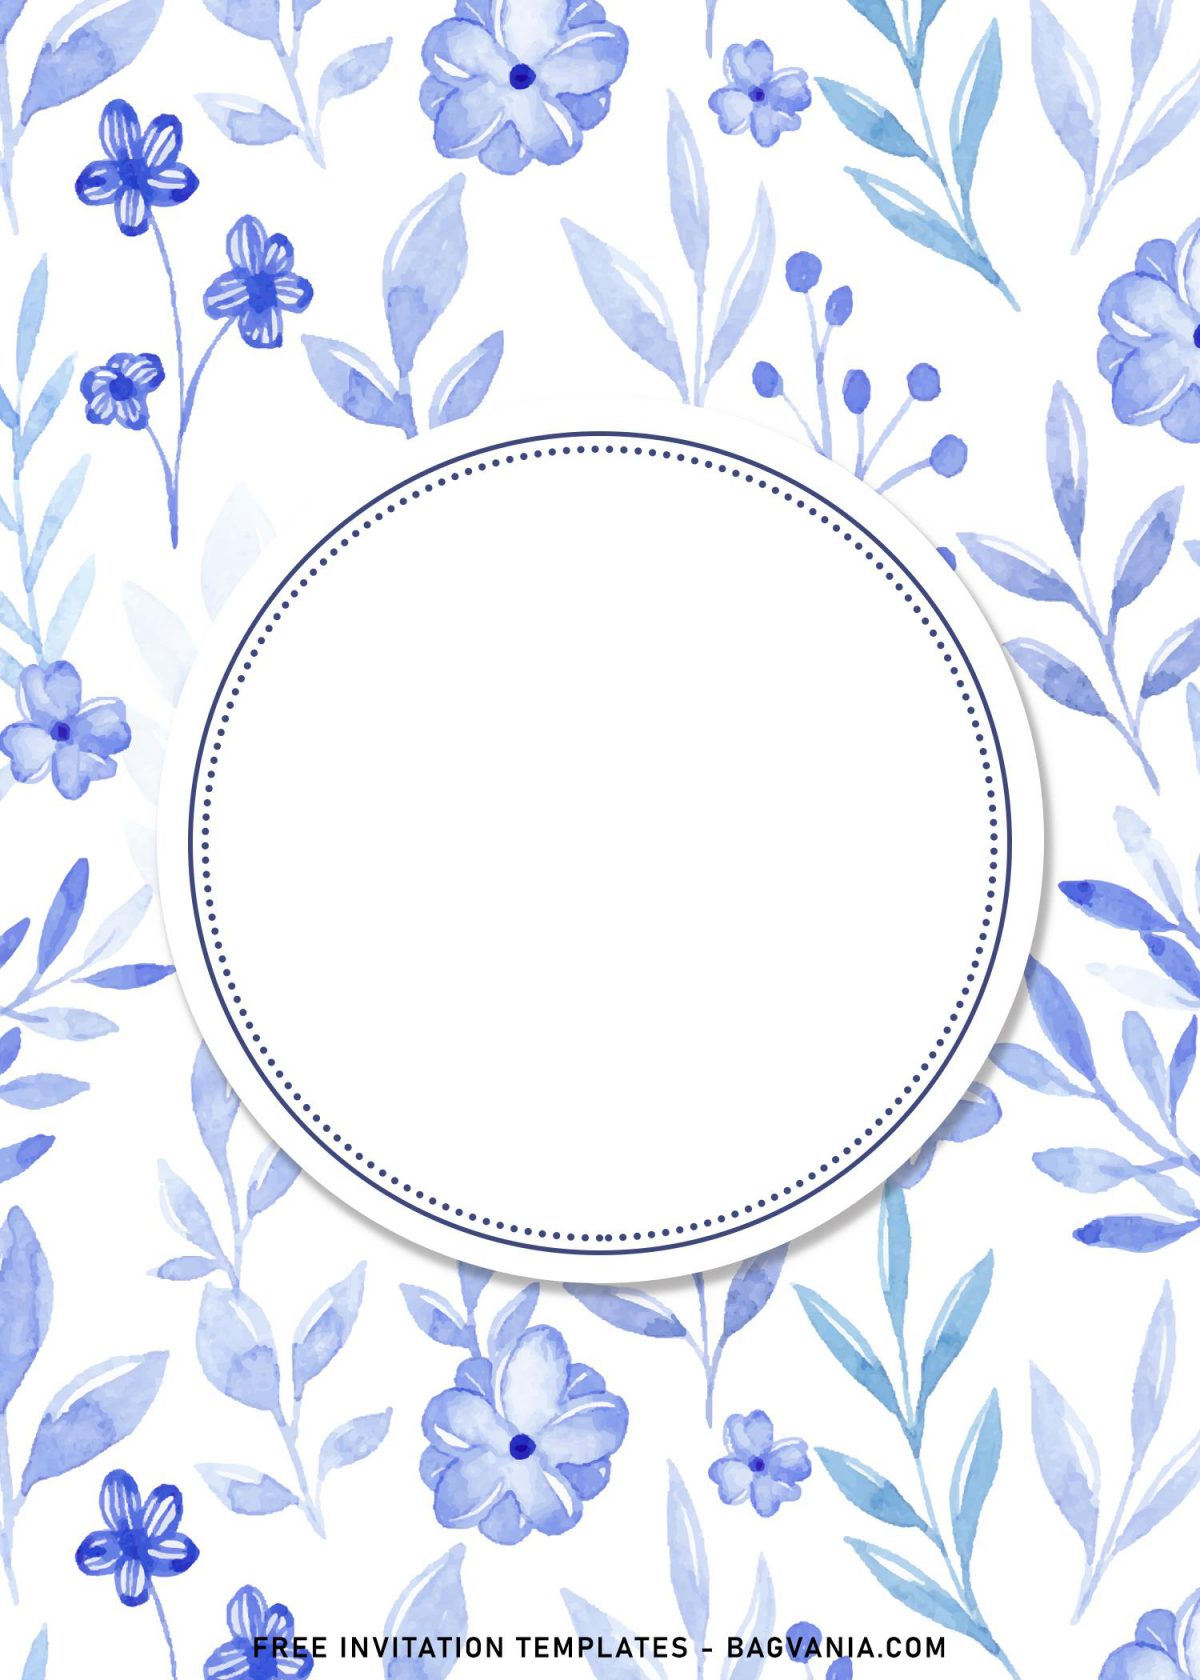 9+ Blue Floral Birthday Invitation Templates and has 